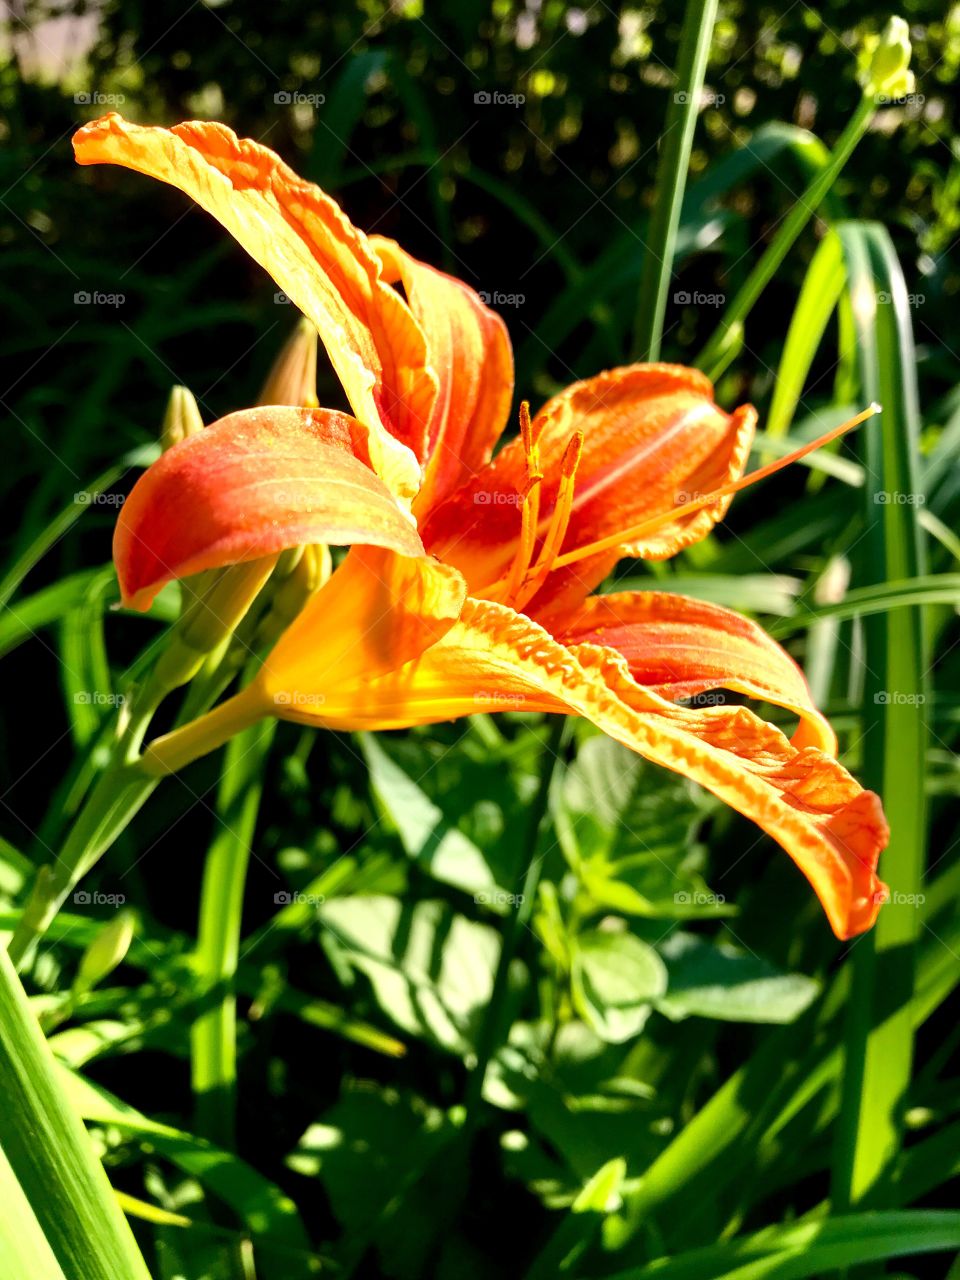 A lily flower lit by the sun